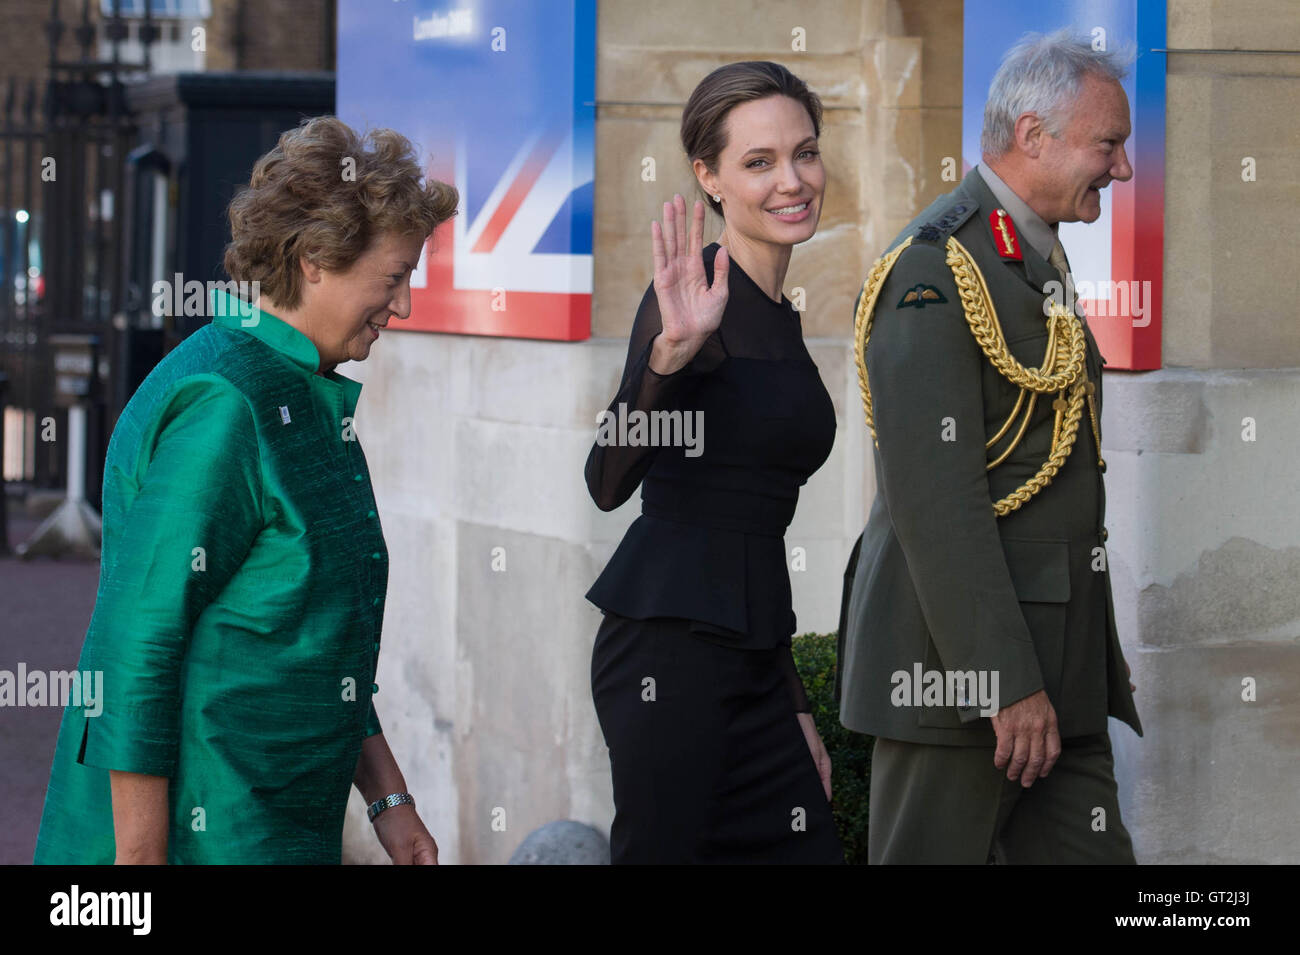 UN Special Envoy, Angelina Jolie is greeted by UK Vice Chief of the Defence Staff General Sir Gordon Messenger at the UN Peacekeeping Defence Ministerial in London. Stock Photo